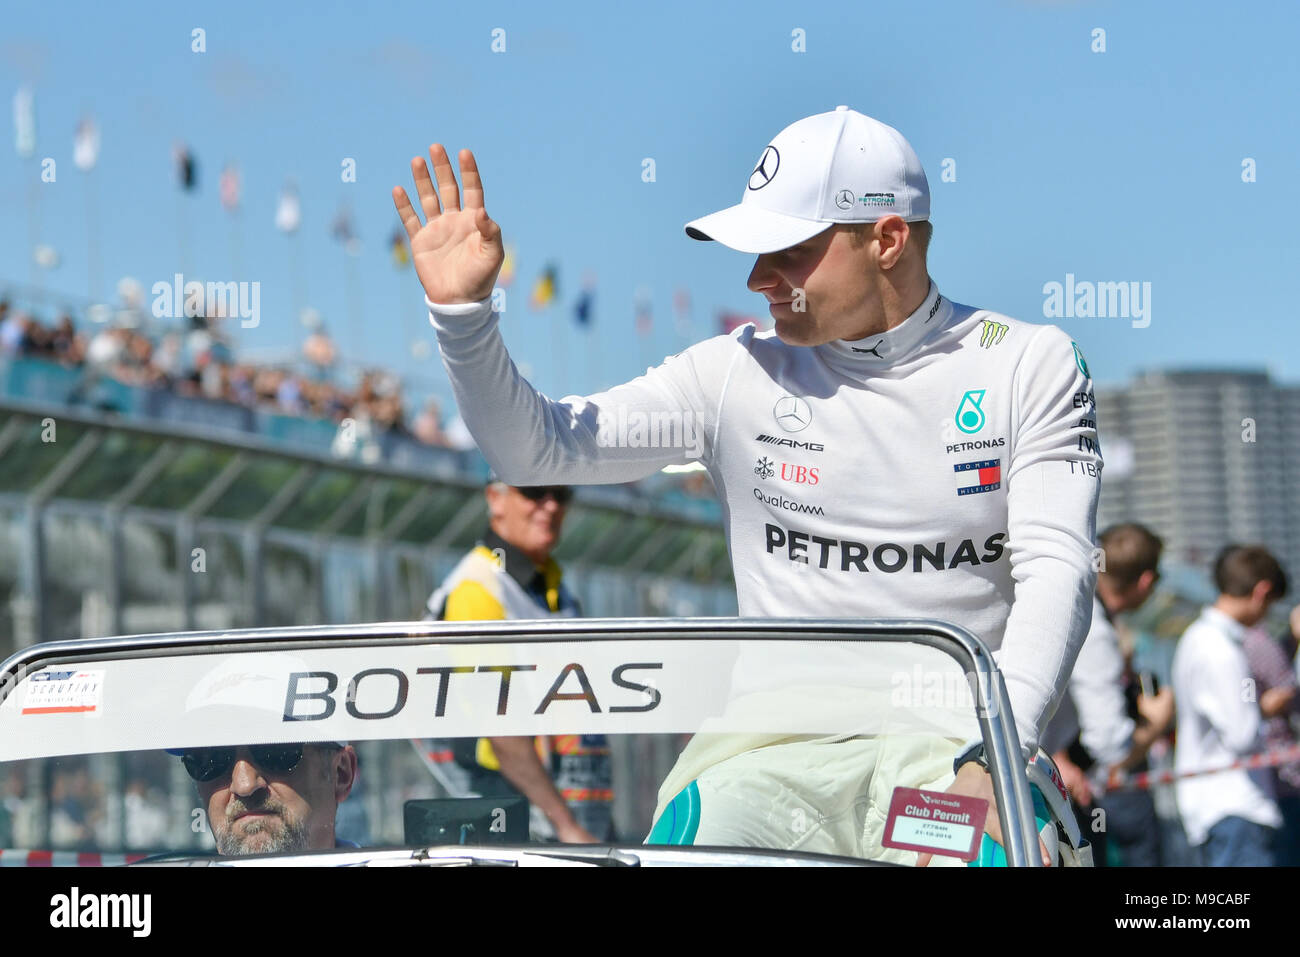 Albert Park, Melbourne, Australia. 25th Mar, 2018. Valtteri Bottas (FIN) #77 from the Mercedes AMG Petronas Motorsport team waves to the crowd during the drivers' parade at the 2018 Australian Formula One Grand Prix at Albert Park, Melbourne, Australia. Sydney Low/Cal Sport Media/Alamy Live News Stock Photo